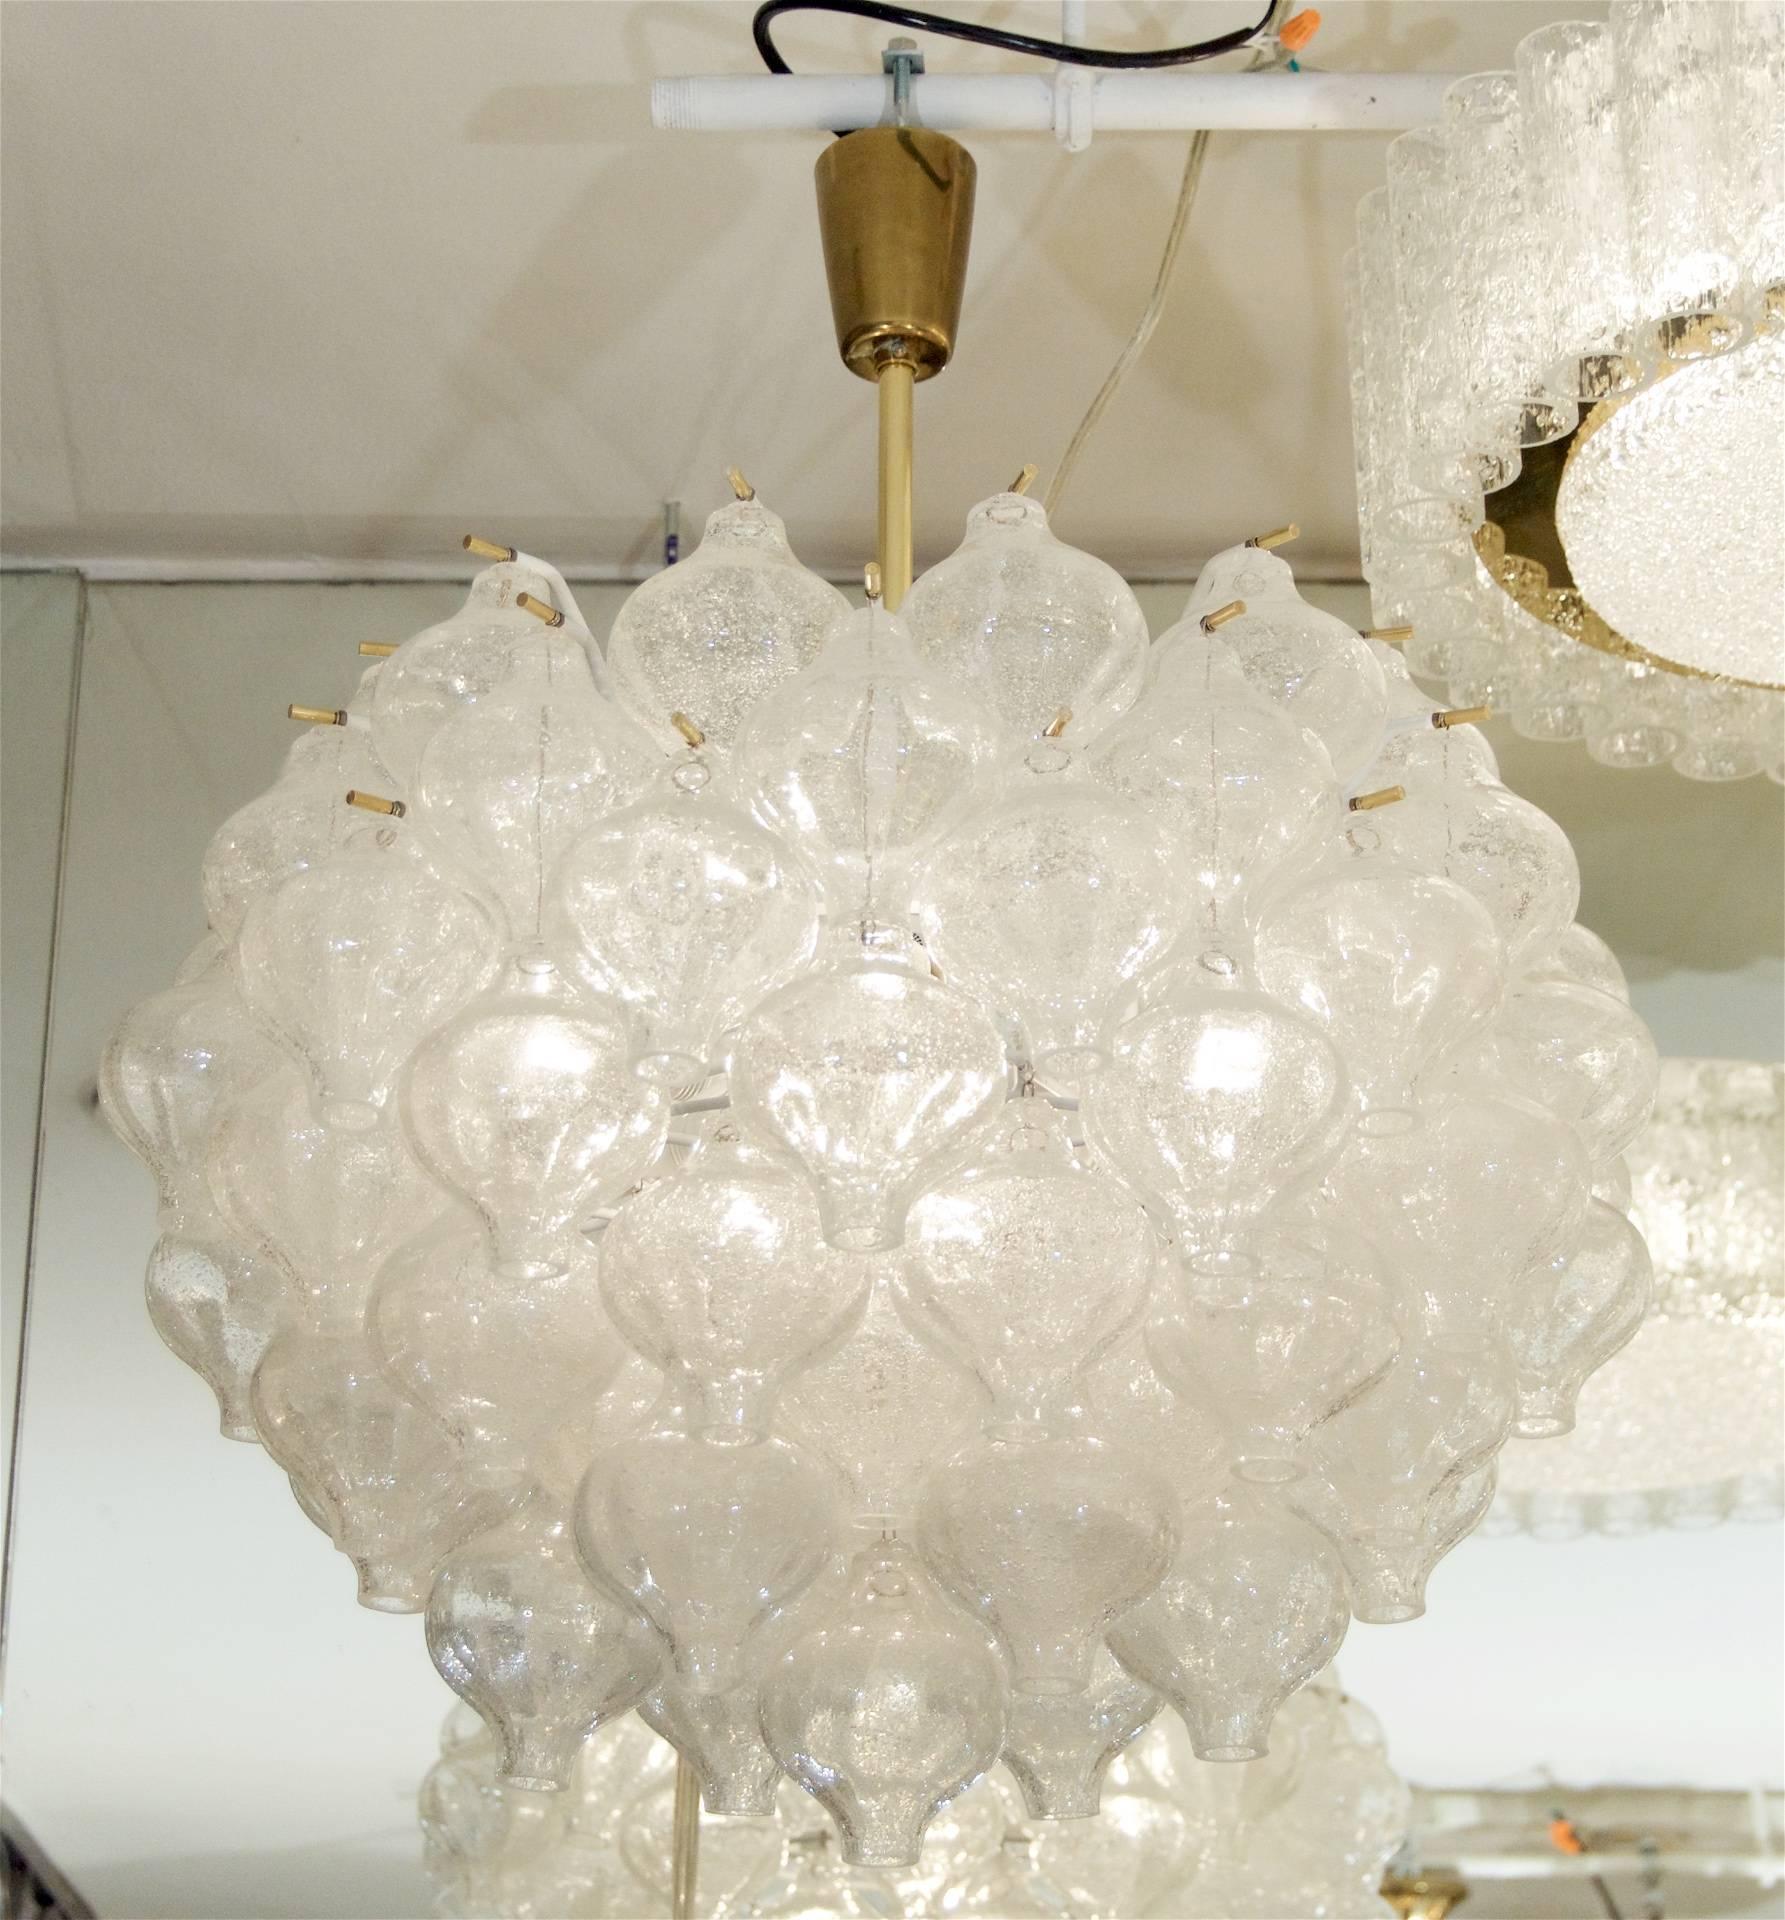 An exceptional Kalmar Tulipan glass pattern chandeliers, having 71 individually hung pieces of glass. Each piece of handblown glass is wire suspended on brass pins, with the central body in enameled white.

Twelve E-14 base bulbs radiate from the